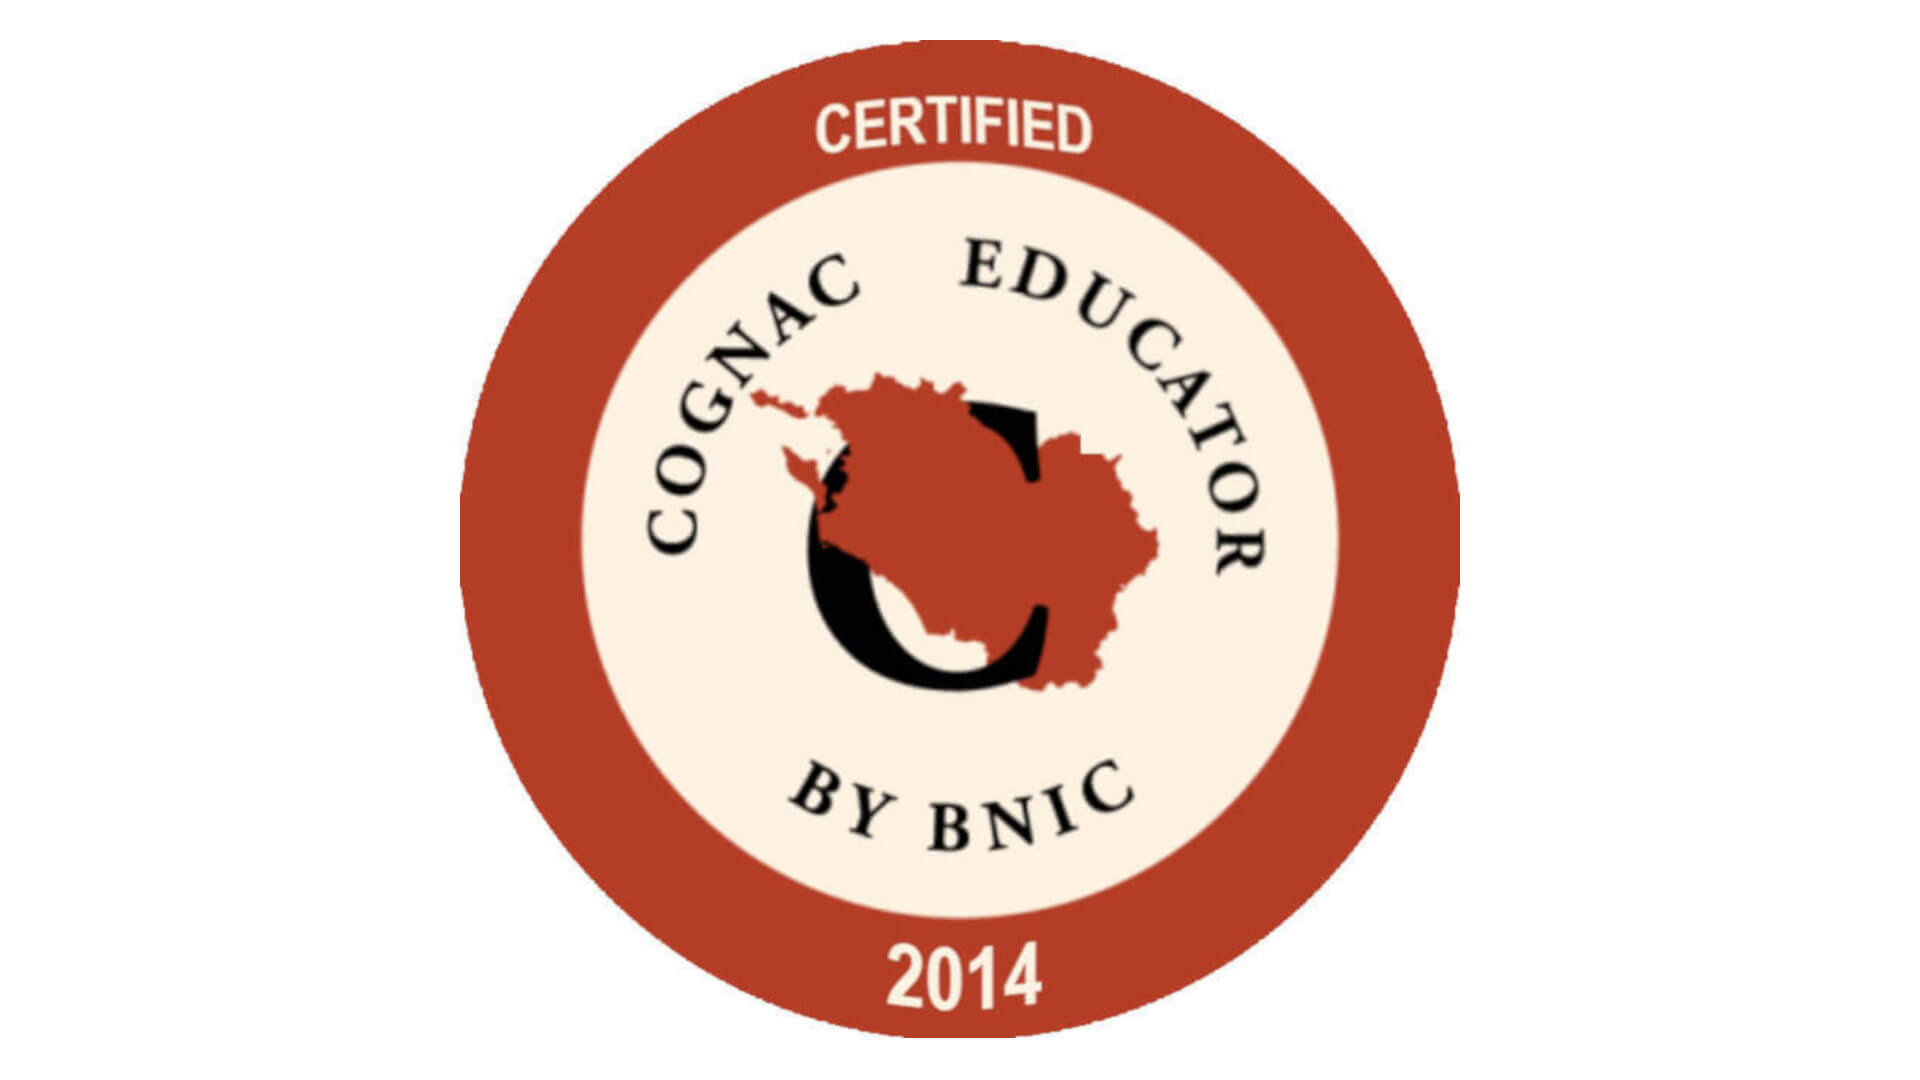 Independent Certified Cognac Guide appointed by the BNIC,, French Cognac interprofessional body